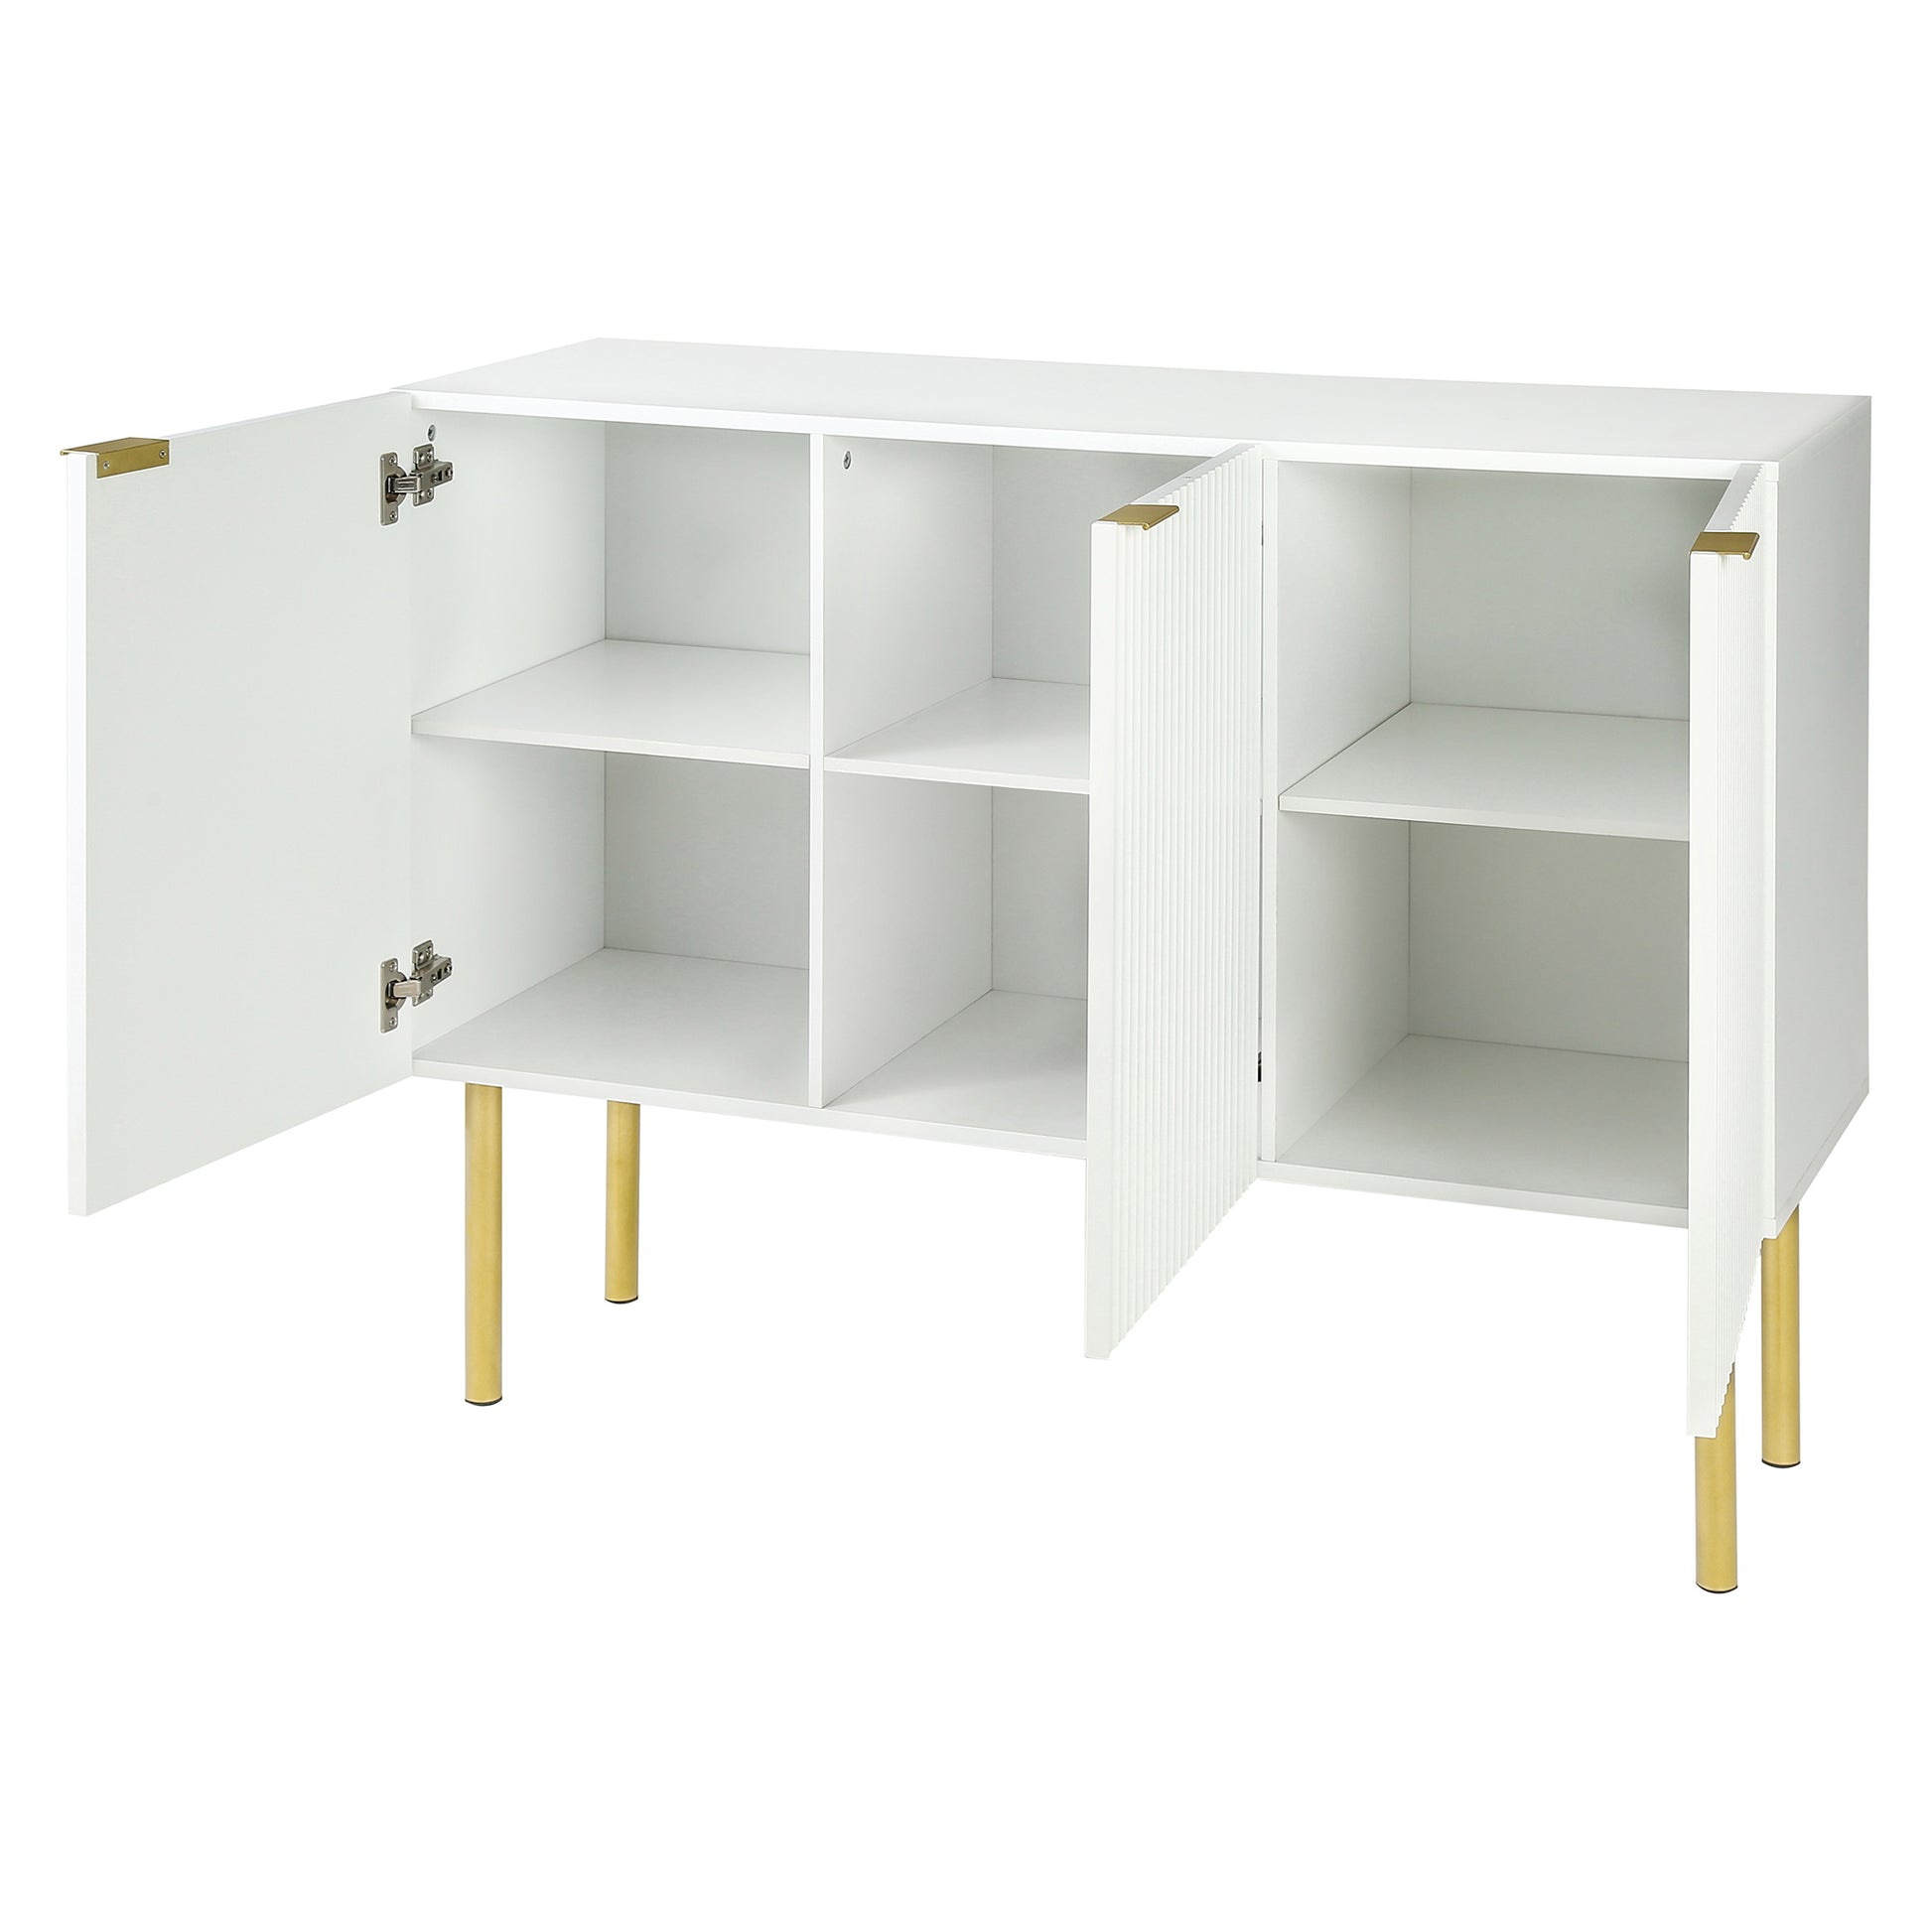 Modern Simple & Luxury Style Sideboard Particle white-particle board